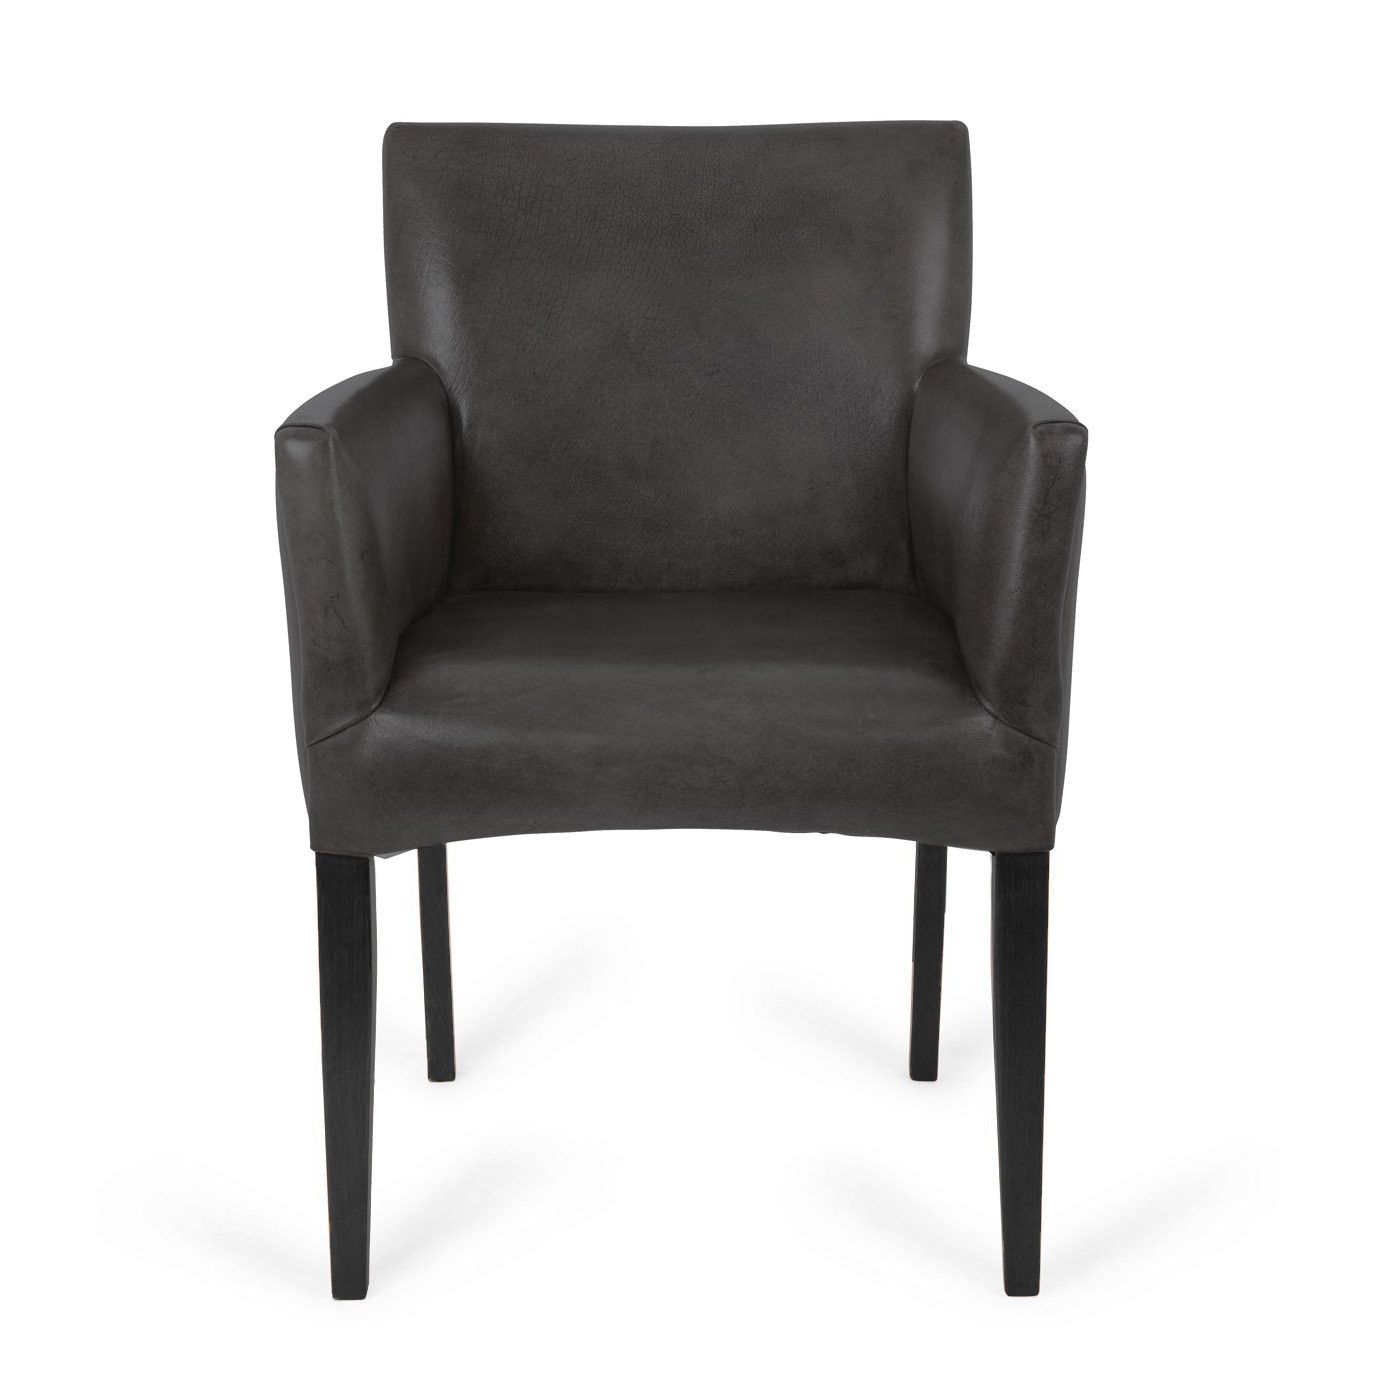 Preferred Caldwell Armchairs With Regard To Cuba Armchair (View 11 of 20)